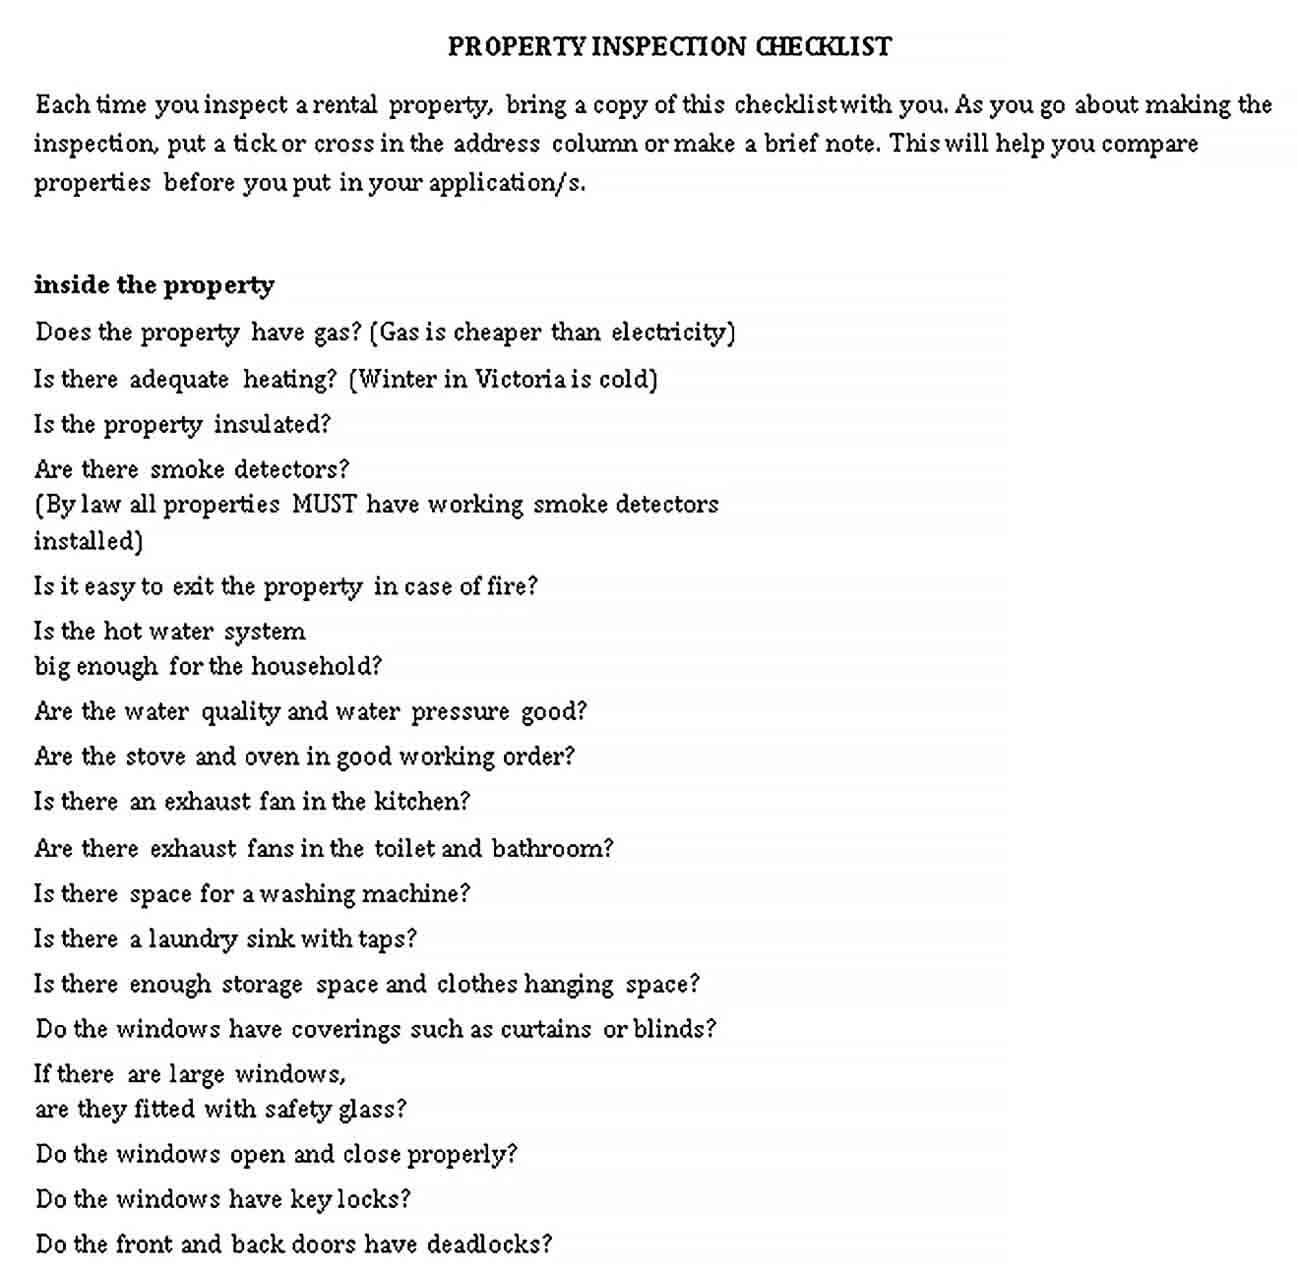 Sample House property inspection checklist